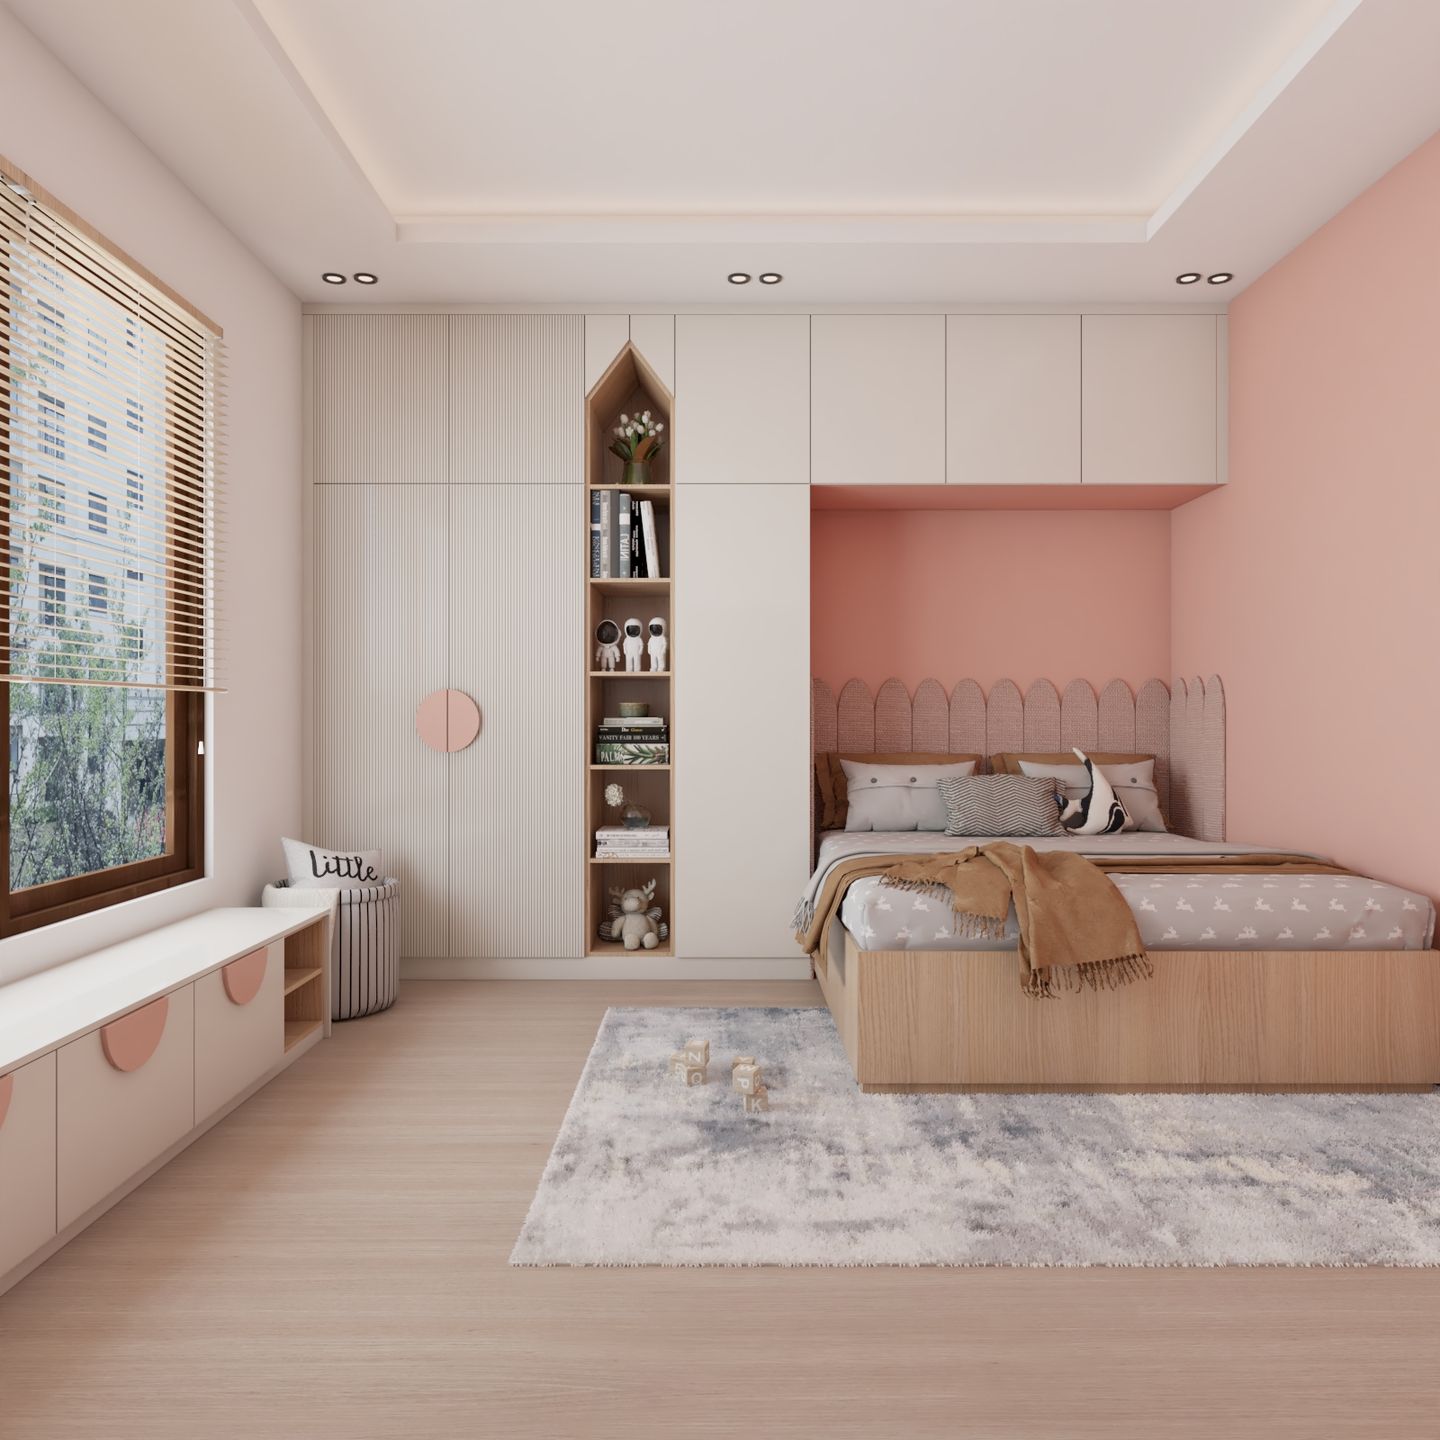 Peach Kids Room Wall Paint With Contemporary Aesthetics - Livspace